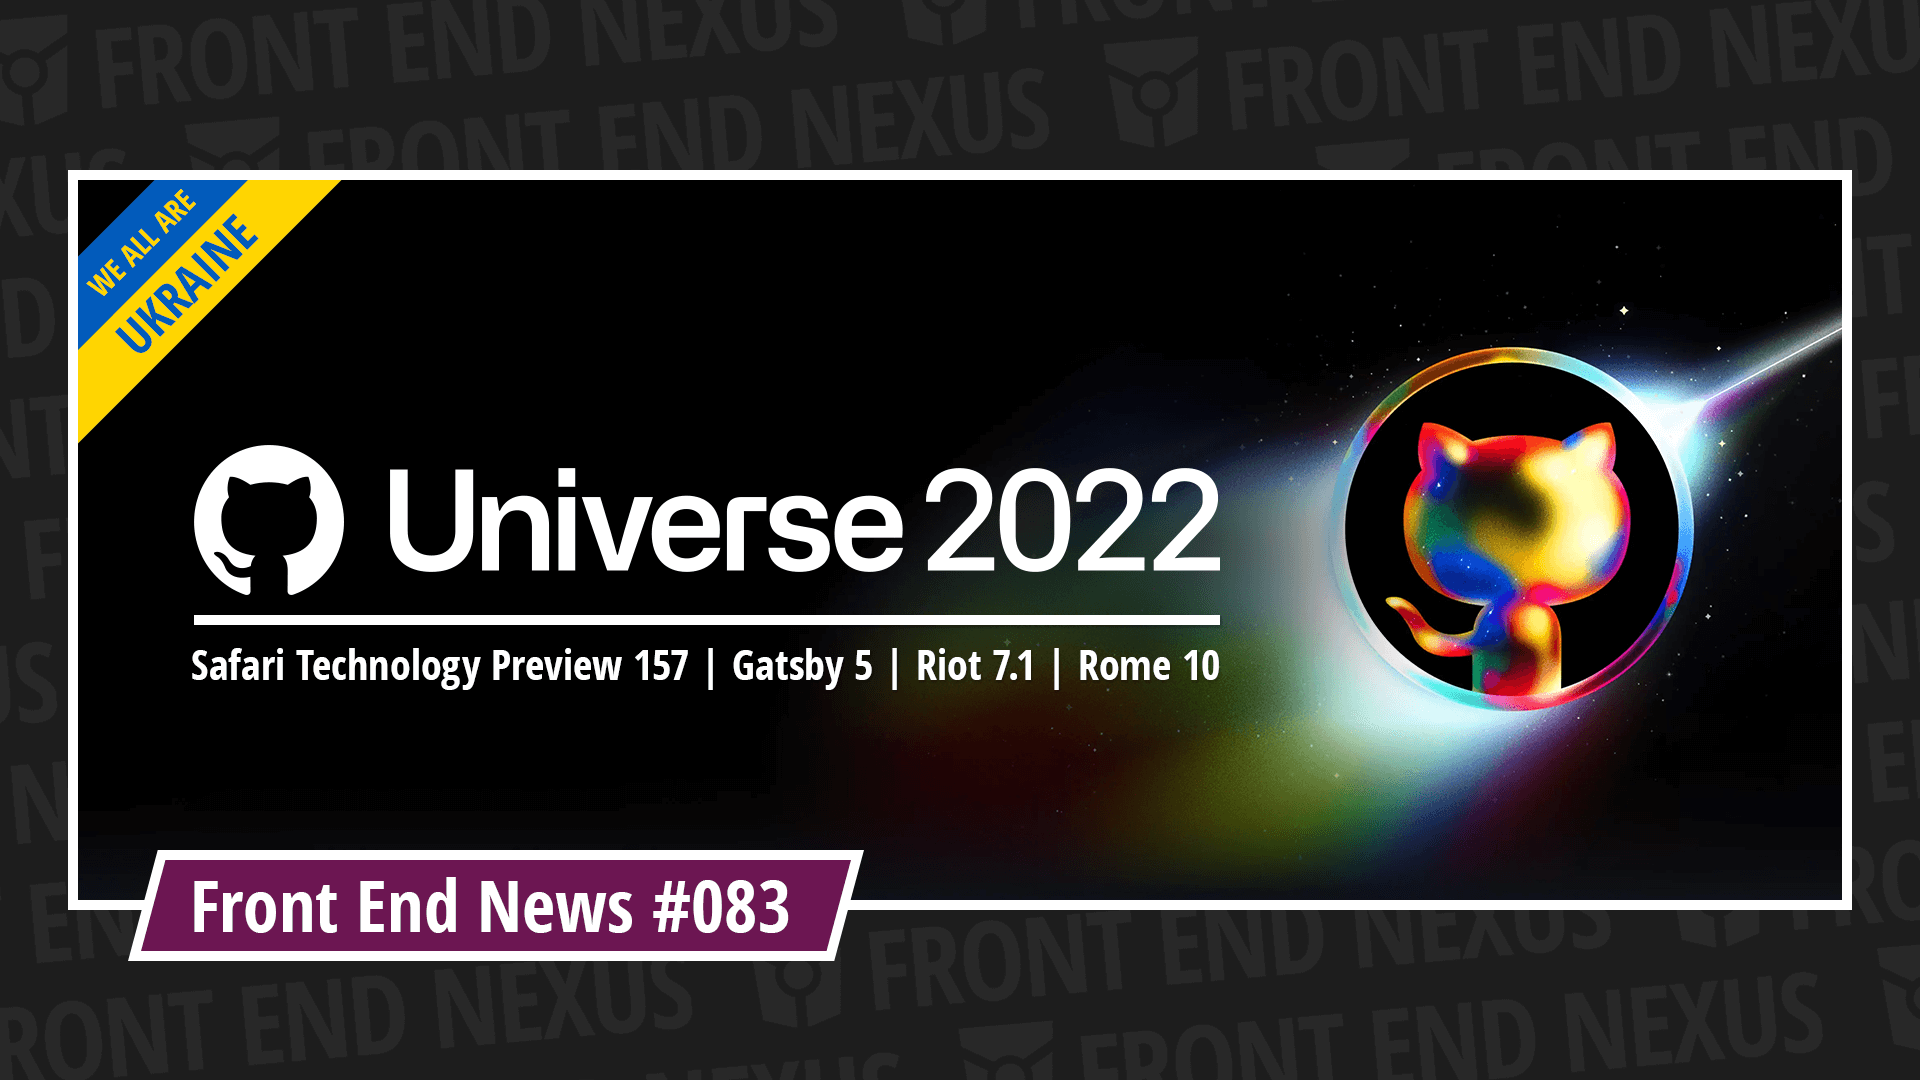 GitHub Universe 2022, Safari TP 157, Gatsby 5, Riot 7.1, Rome 10, and more | Front End News #083